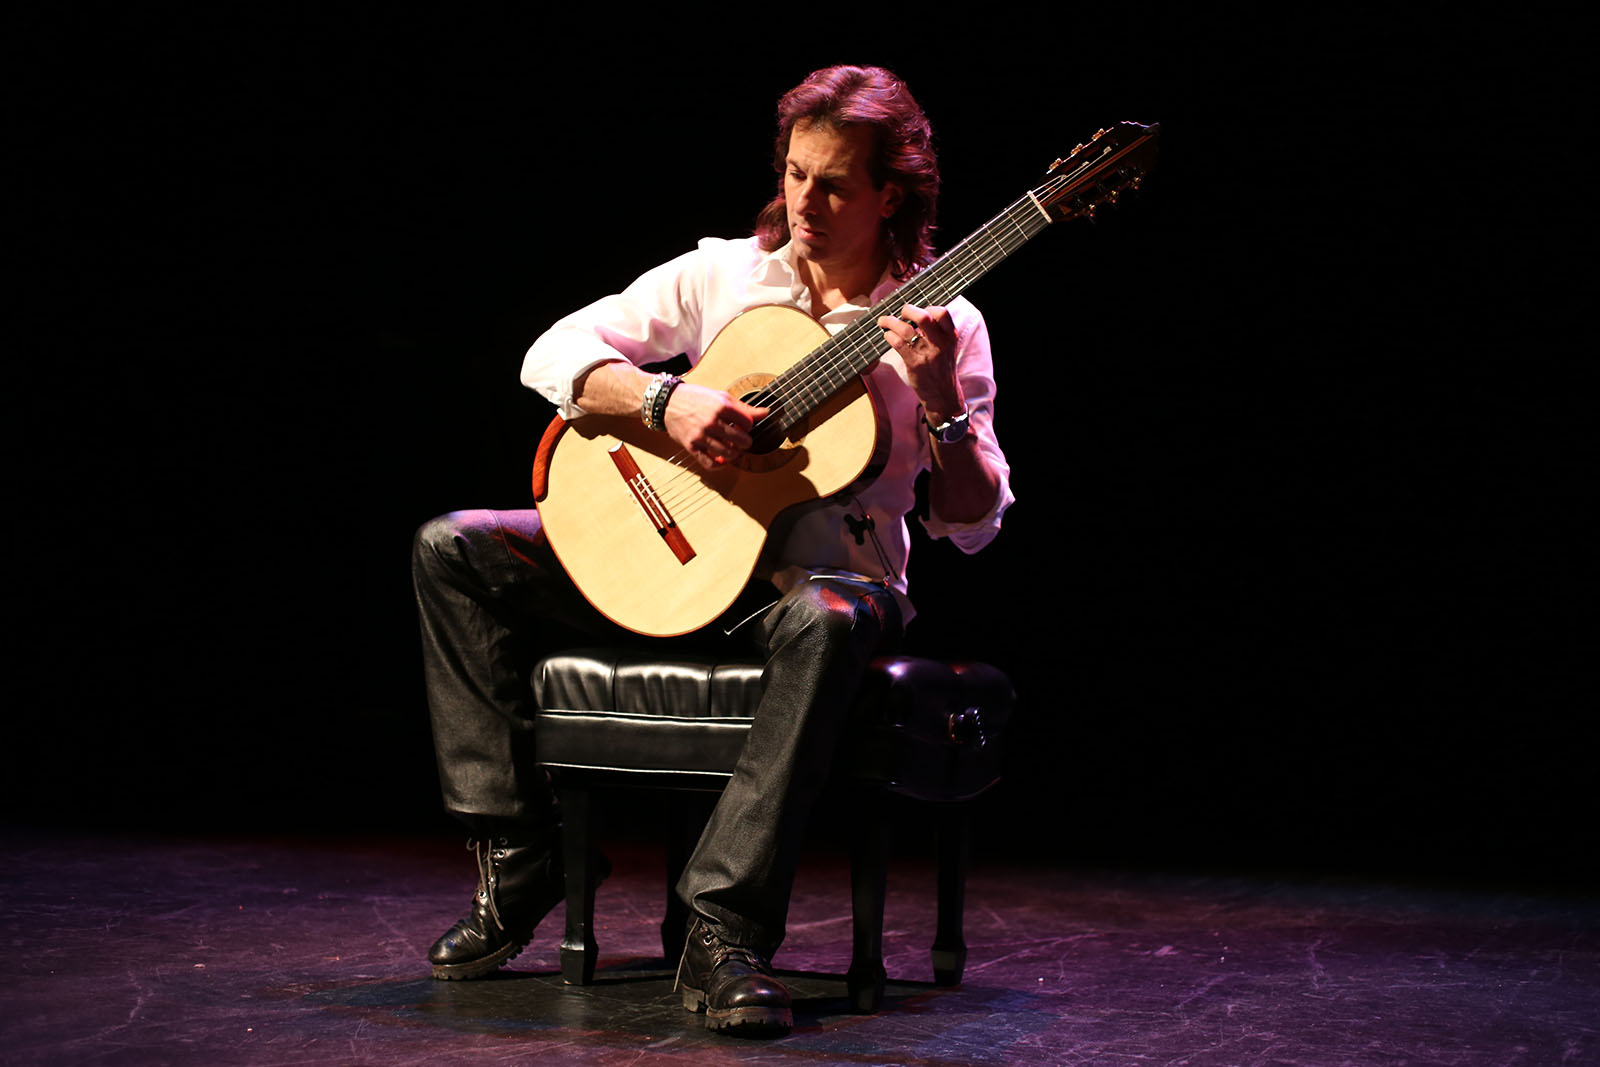 a person playing a guitar sits in a pool of light on a dark stage